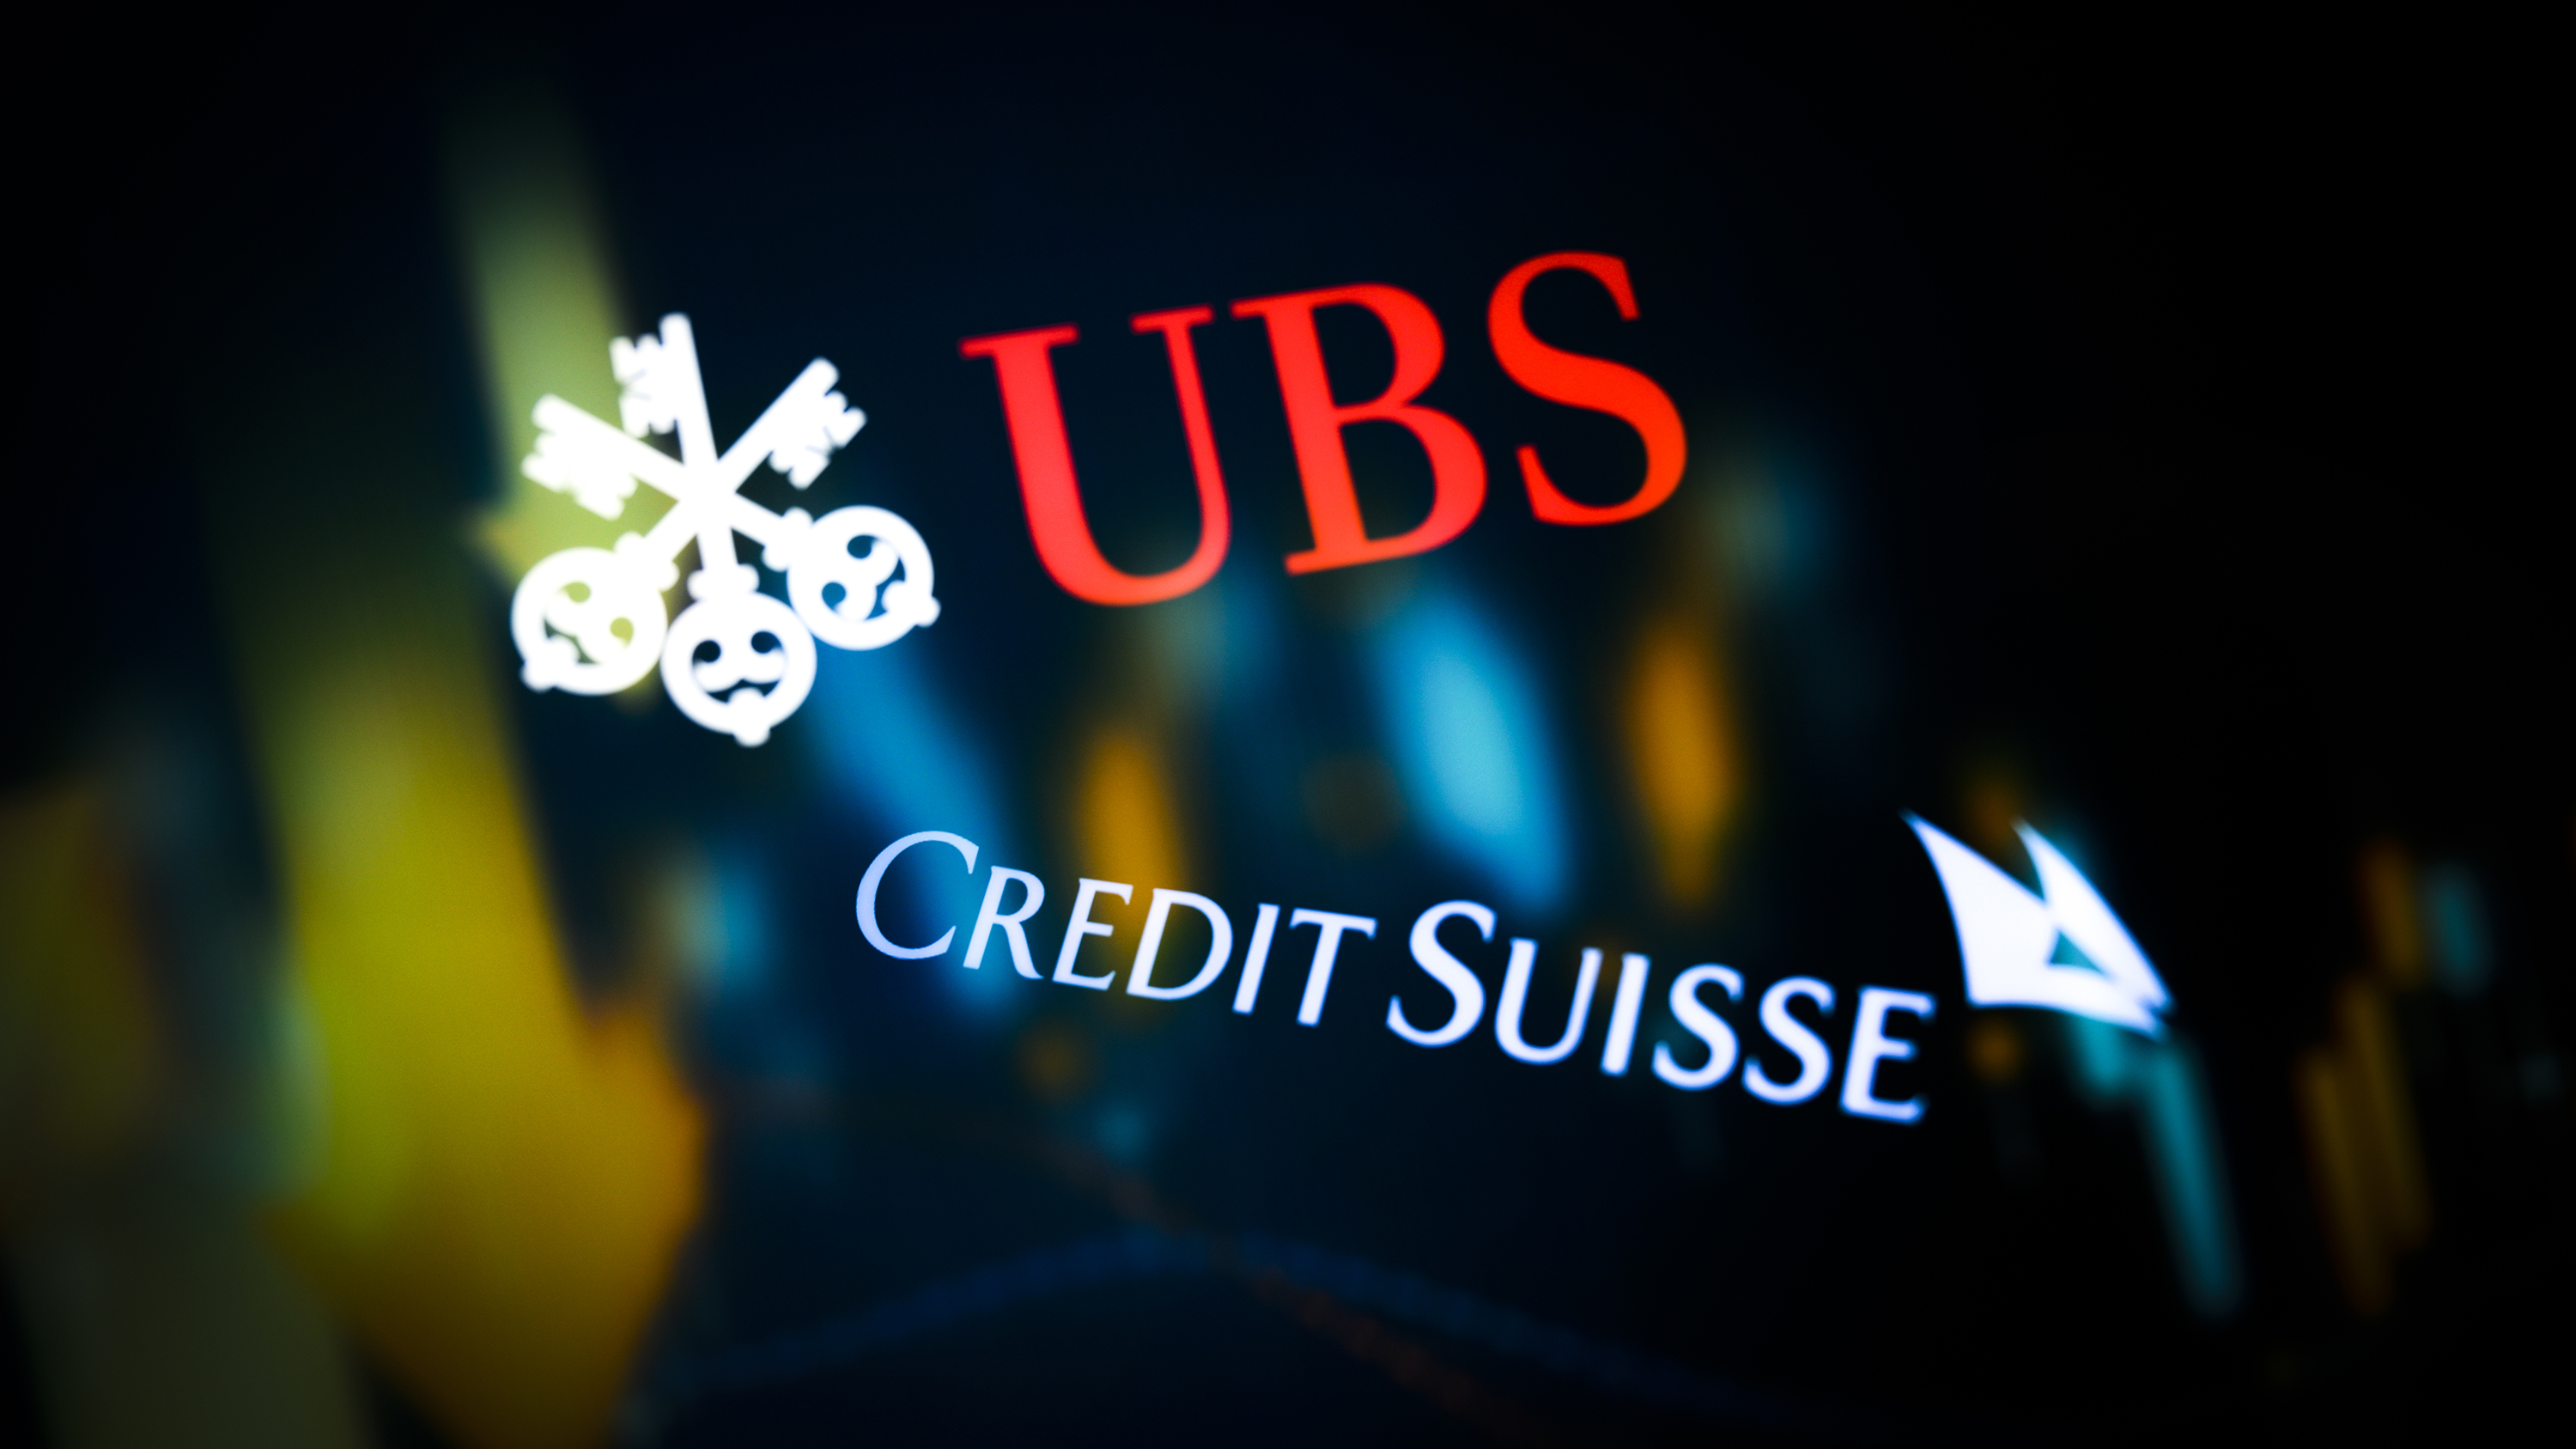 The UBS and Credit Suisse logos